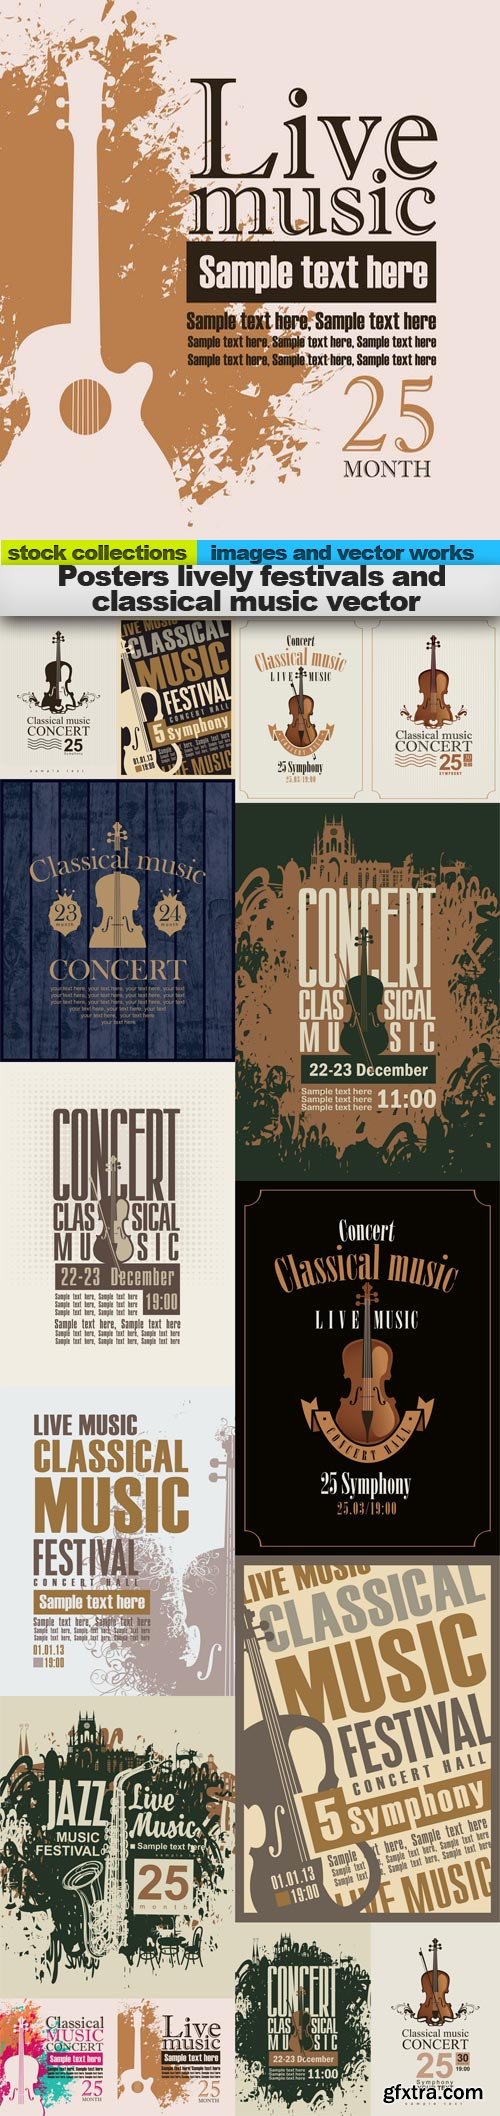 Posters lively festivals and classical music vector, 15 x EPS